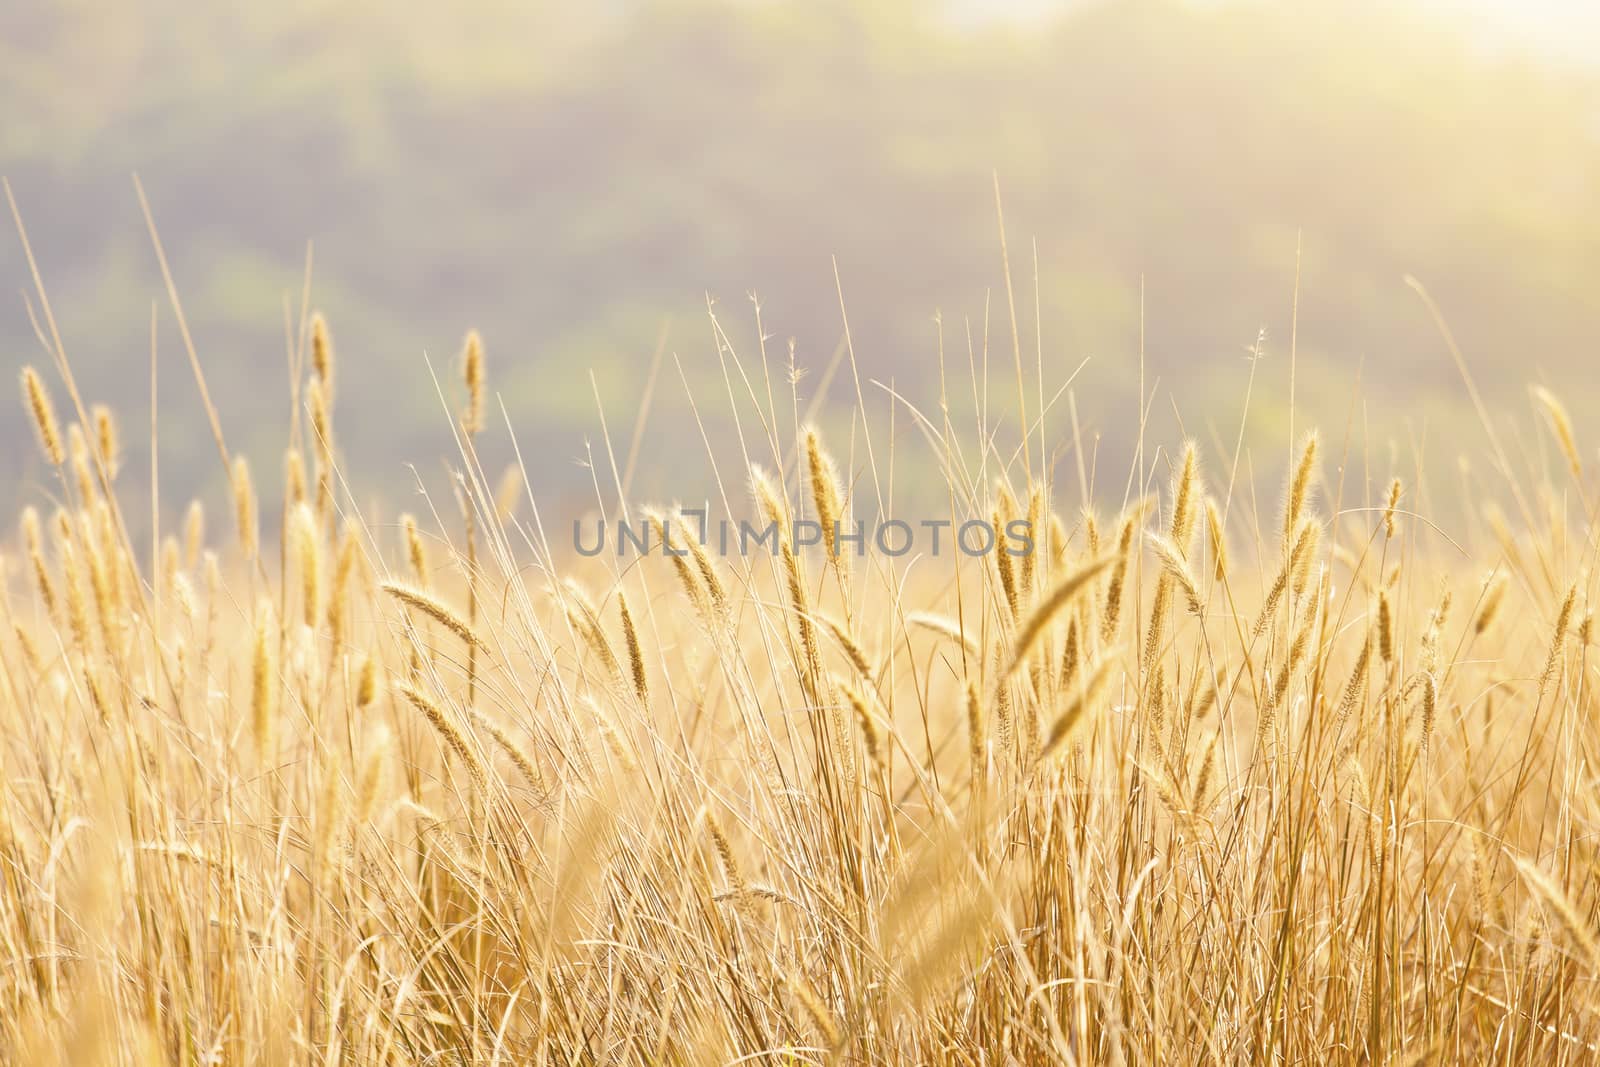 Fantastic wheat field under sunshine by kawing921